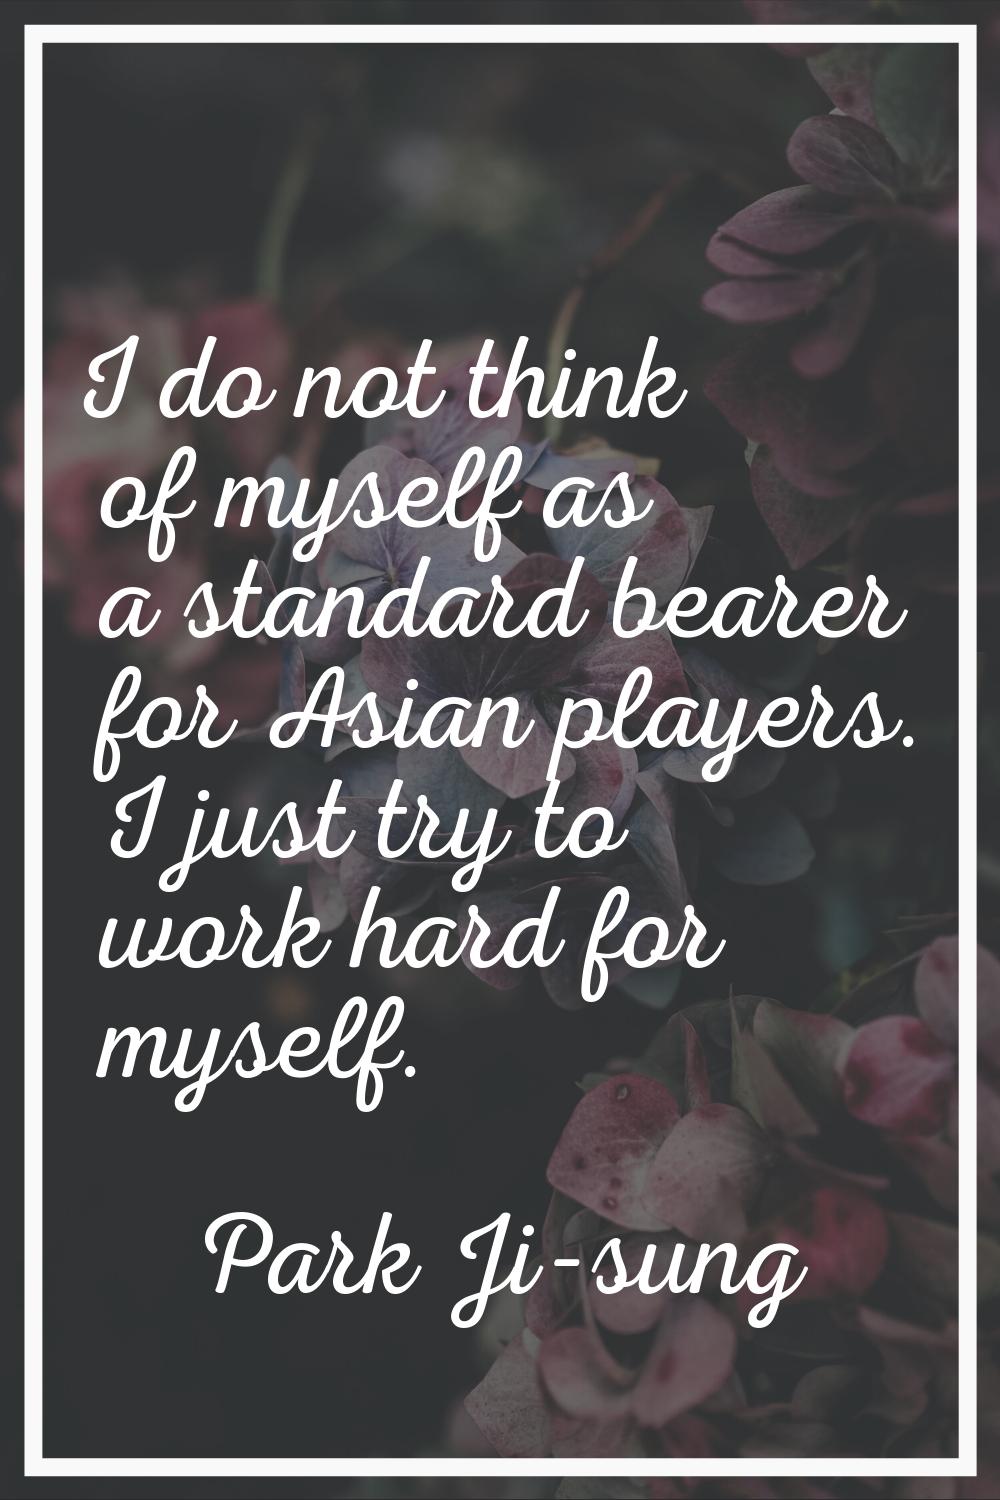 I do not think of myself as a standard bearer for Asian players. I just try to work hard for myself